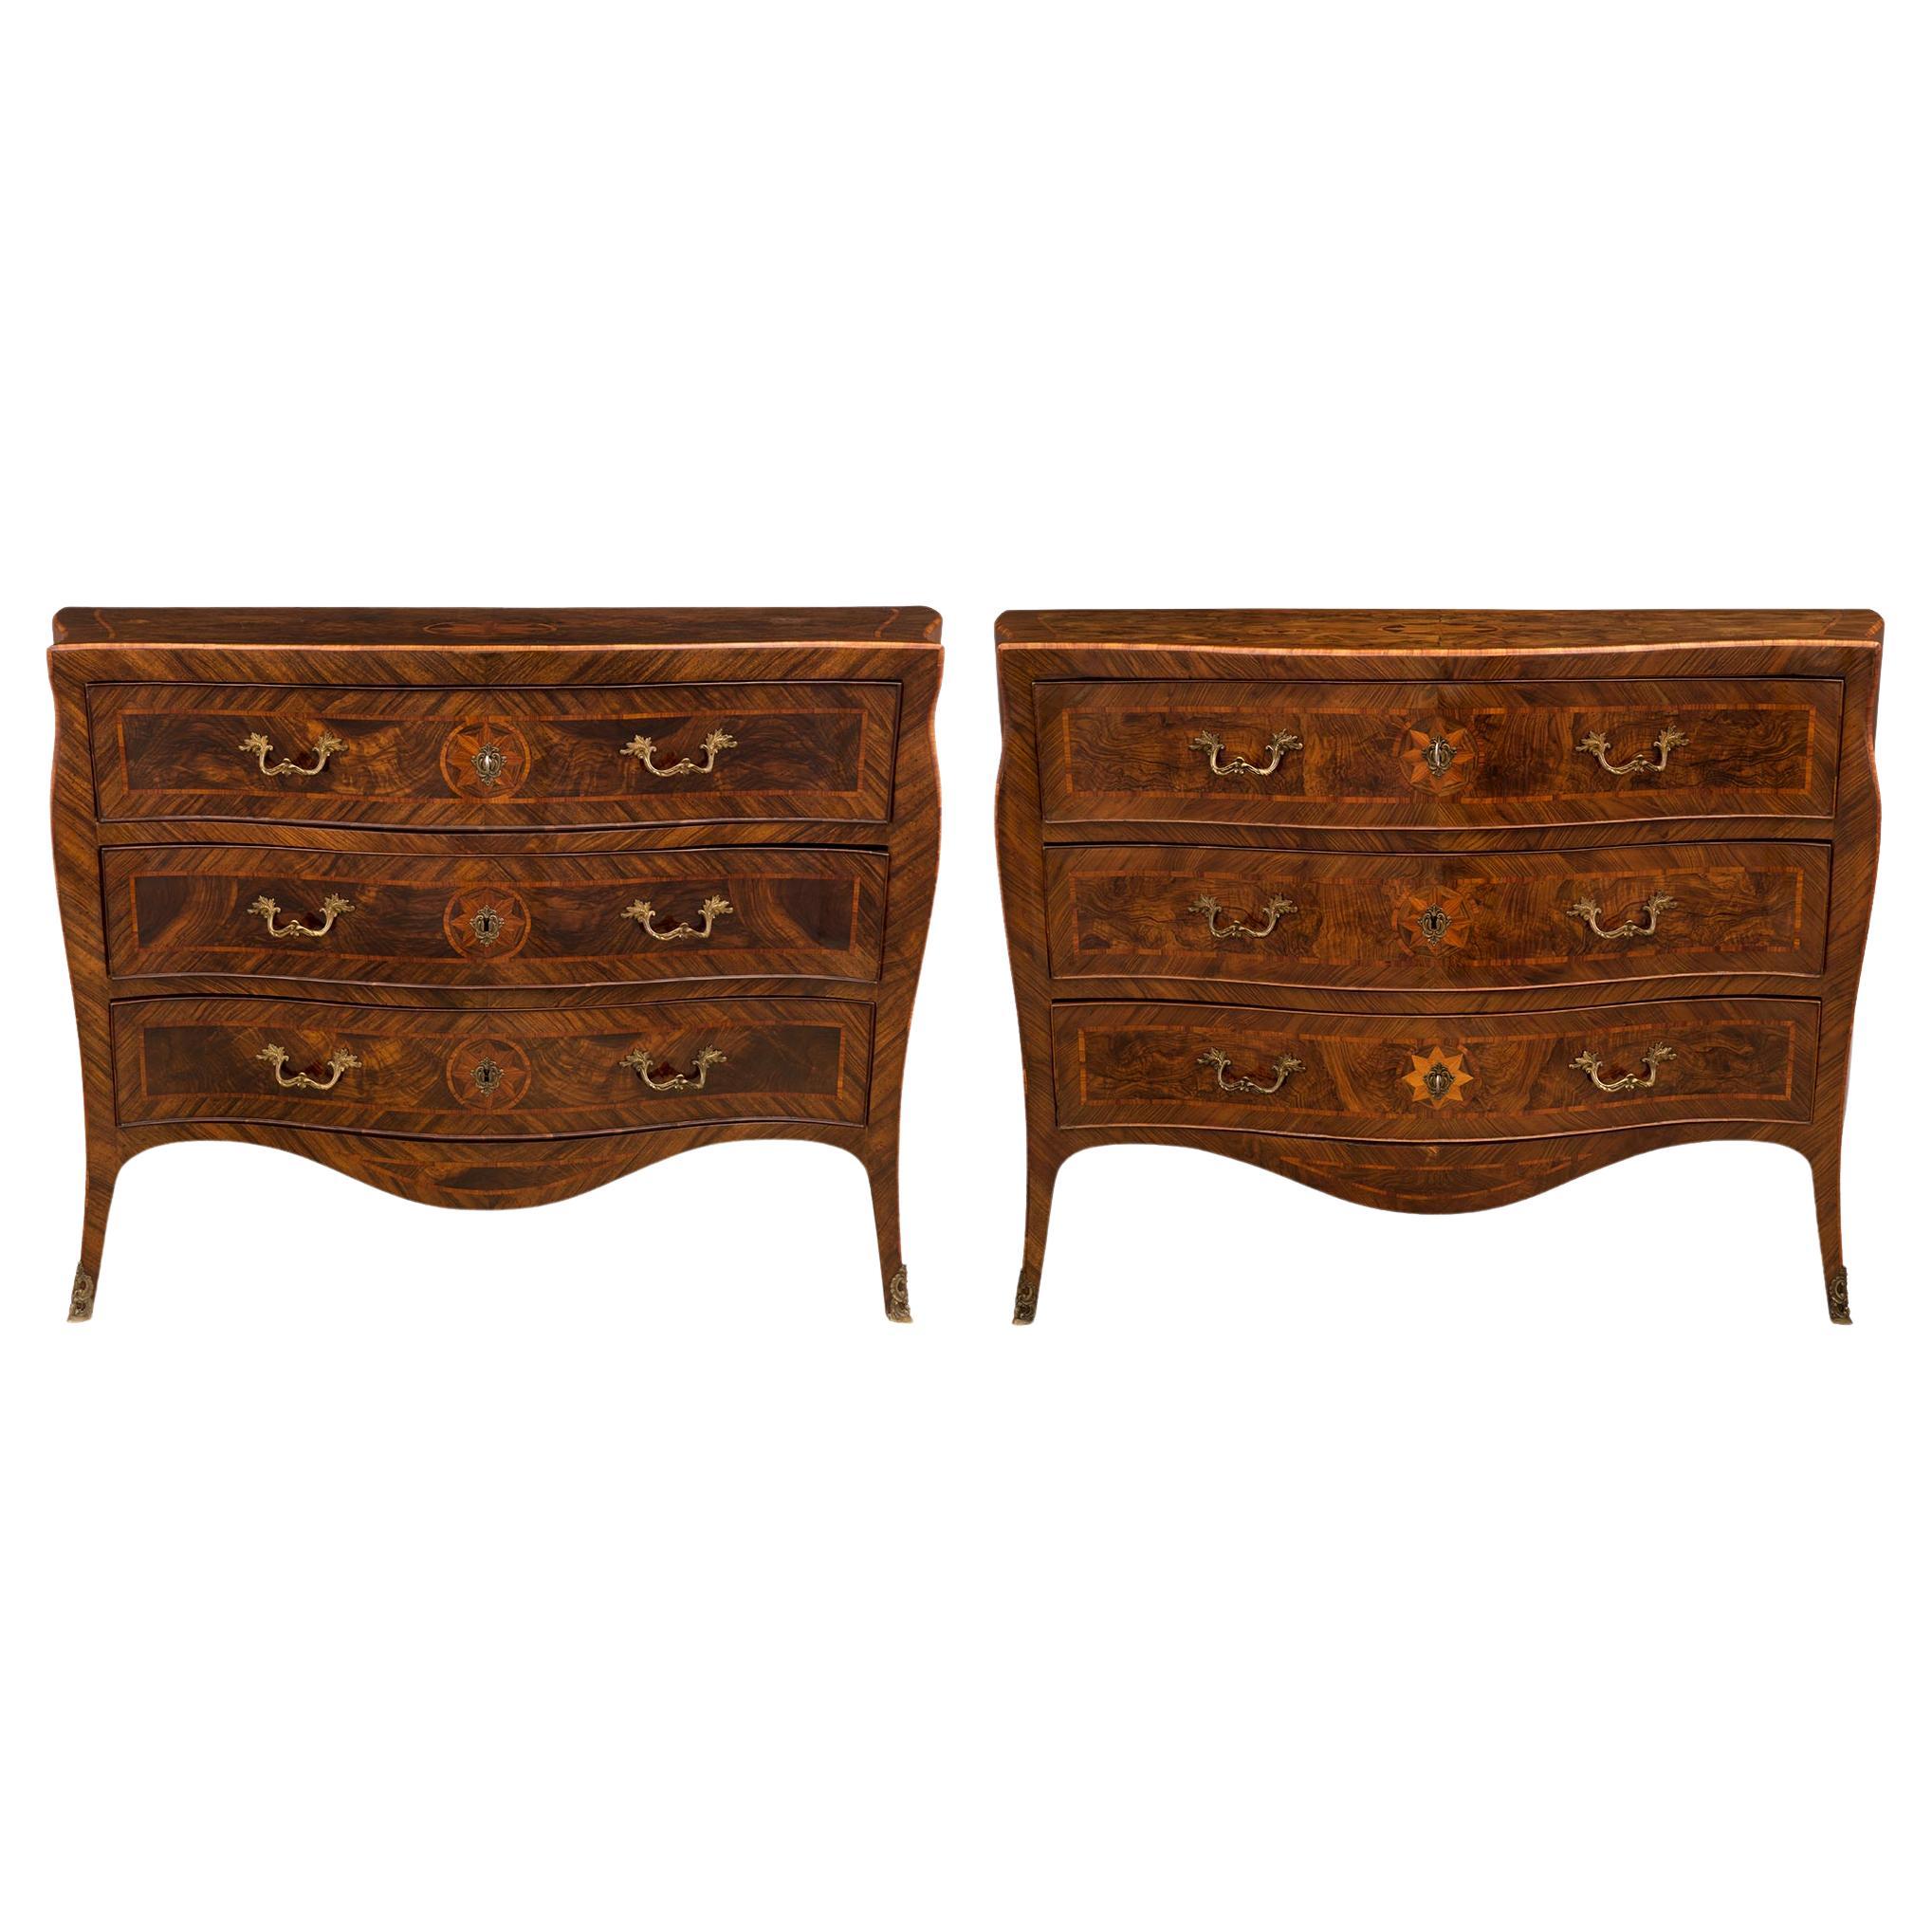 Italian 18th Century Louis XV Period Walnut His and Her Commodes For Sale